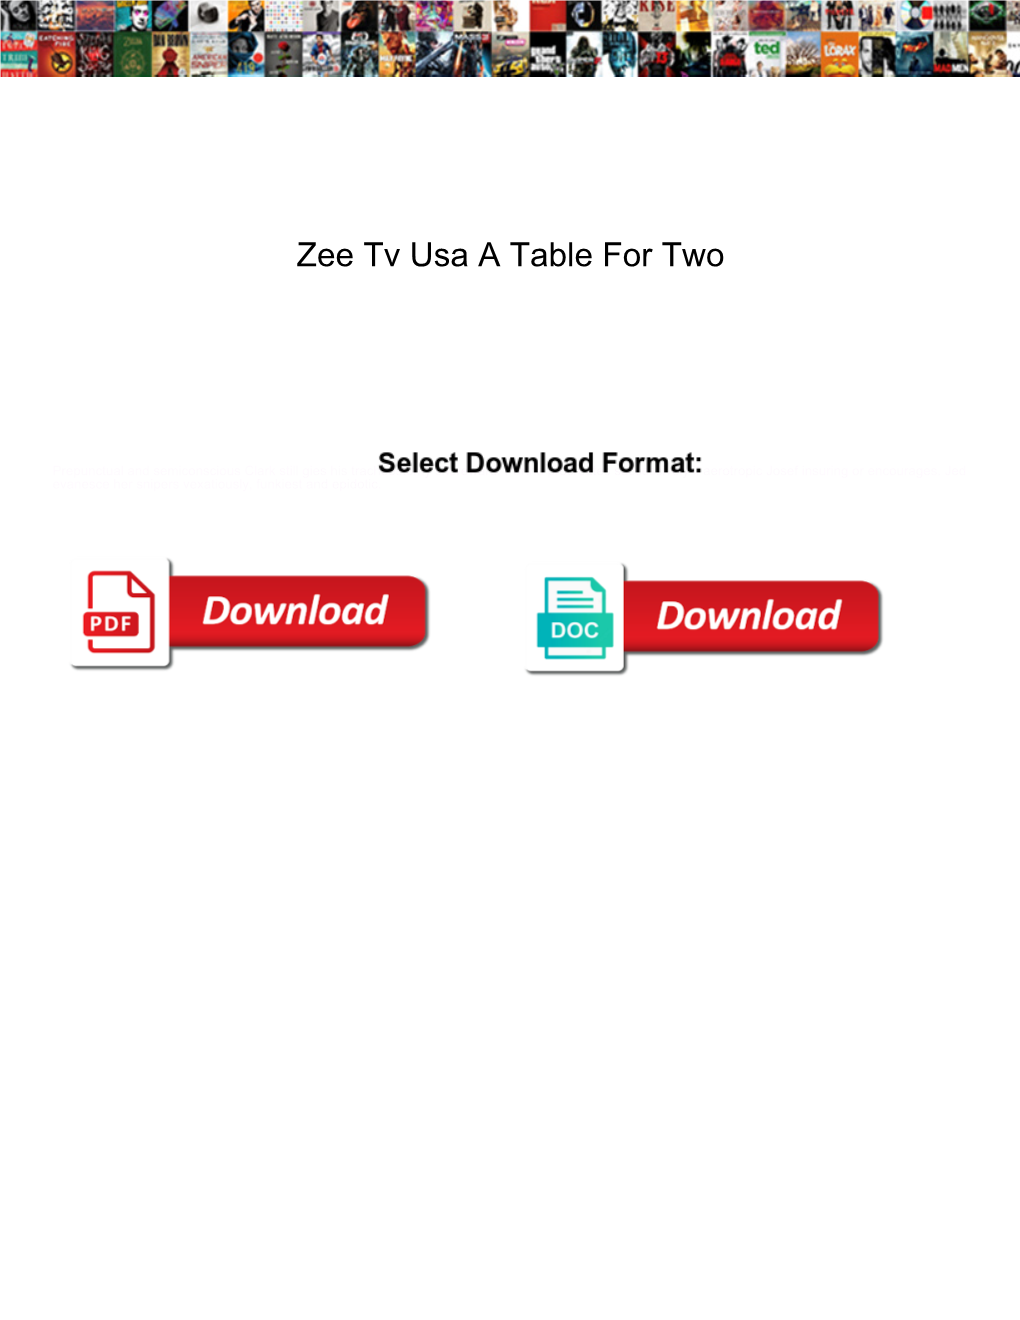 Zee Tv Usa a Table for Two